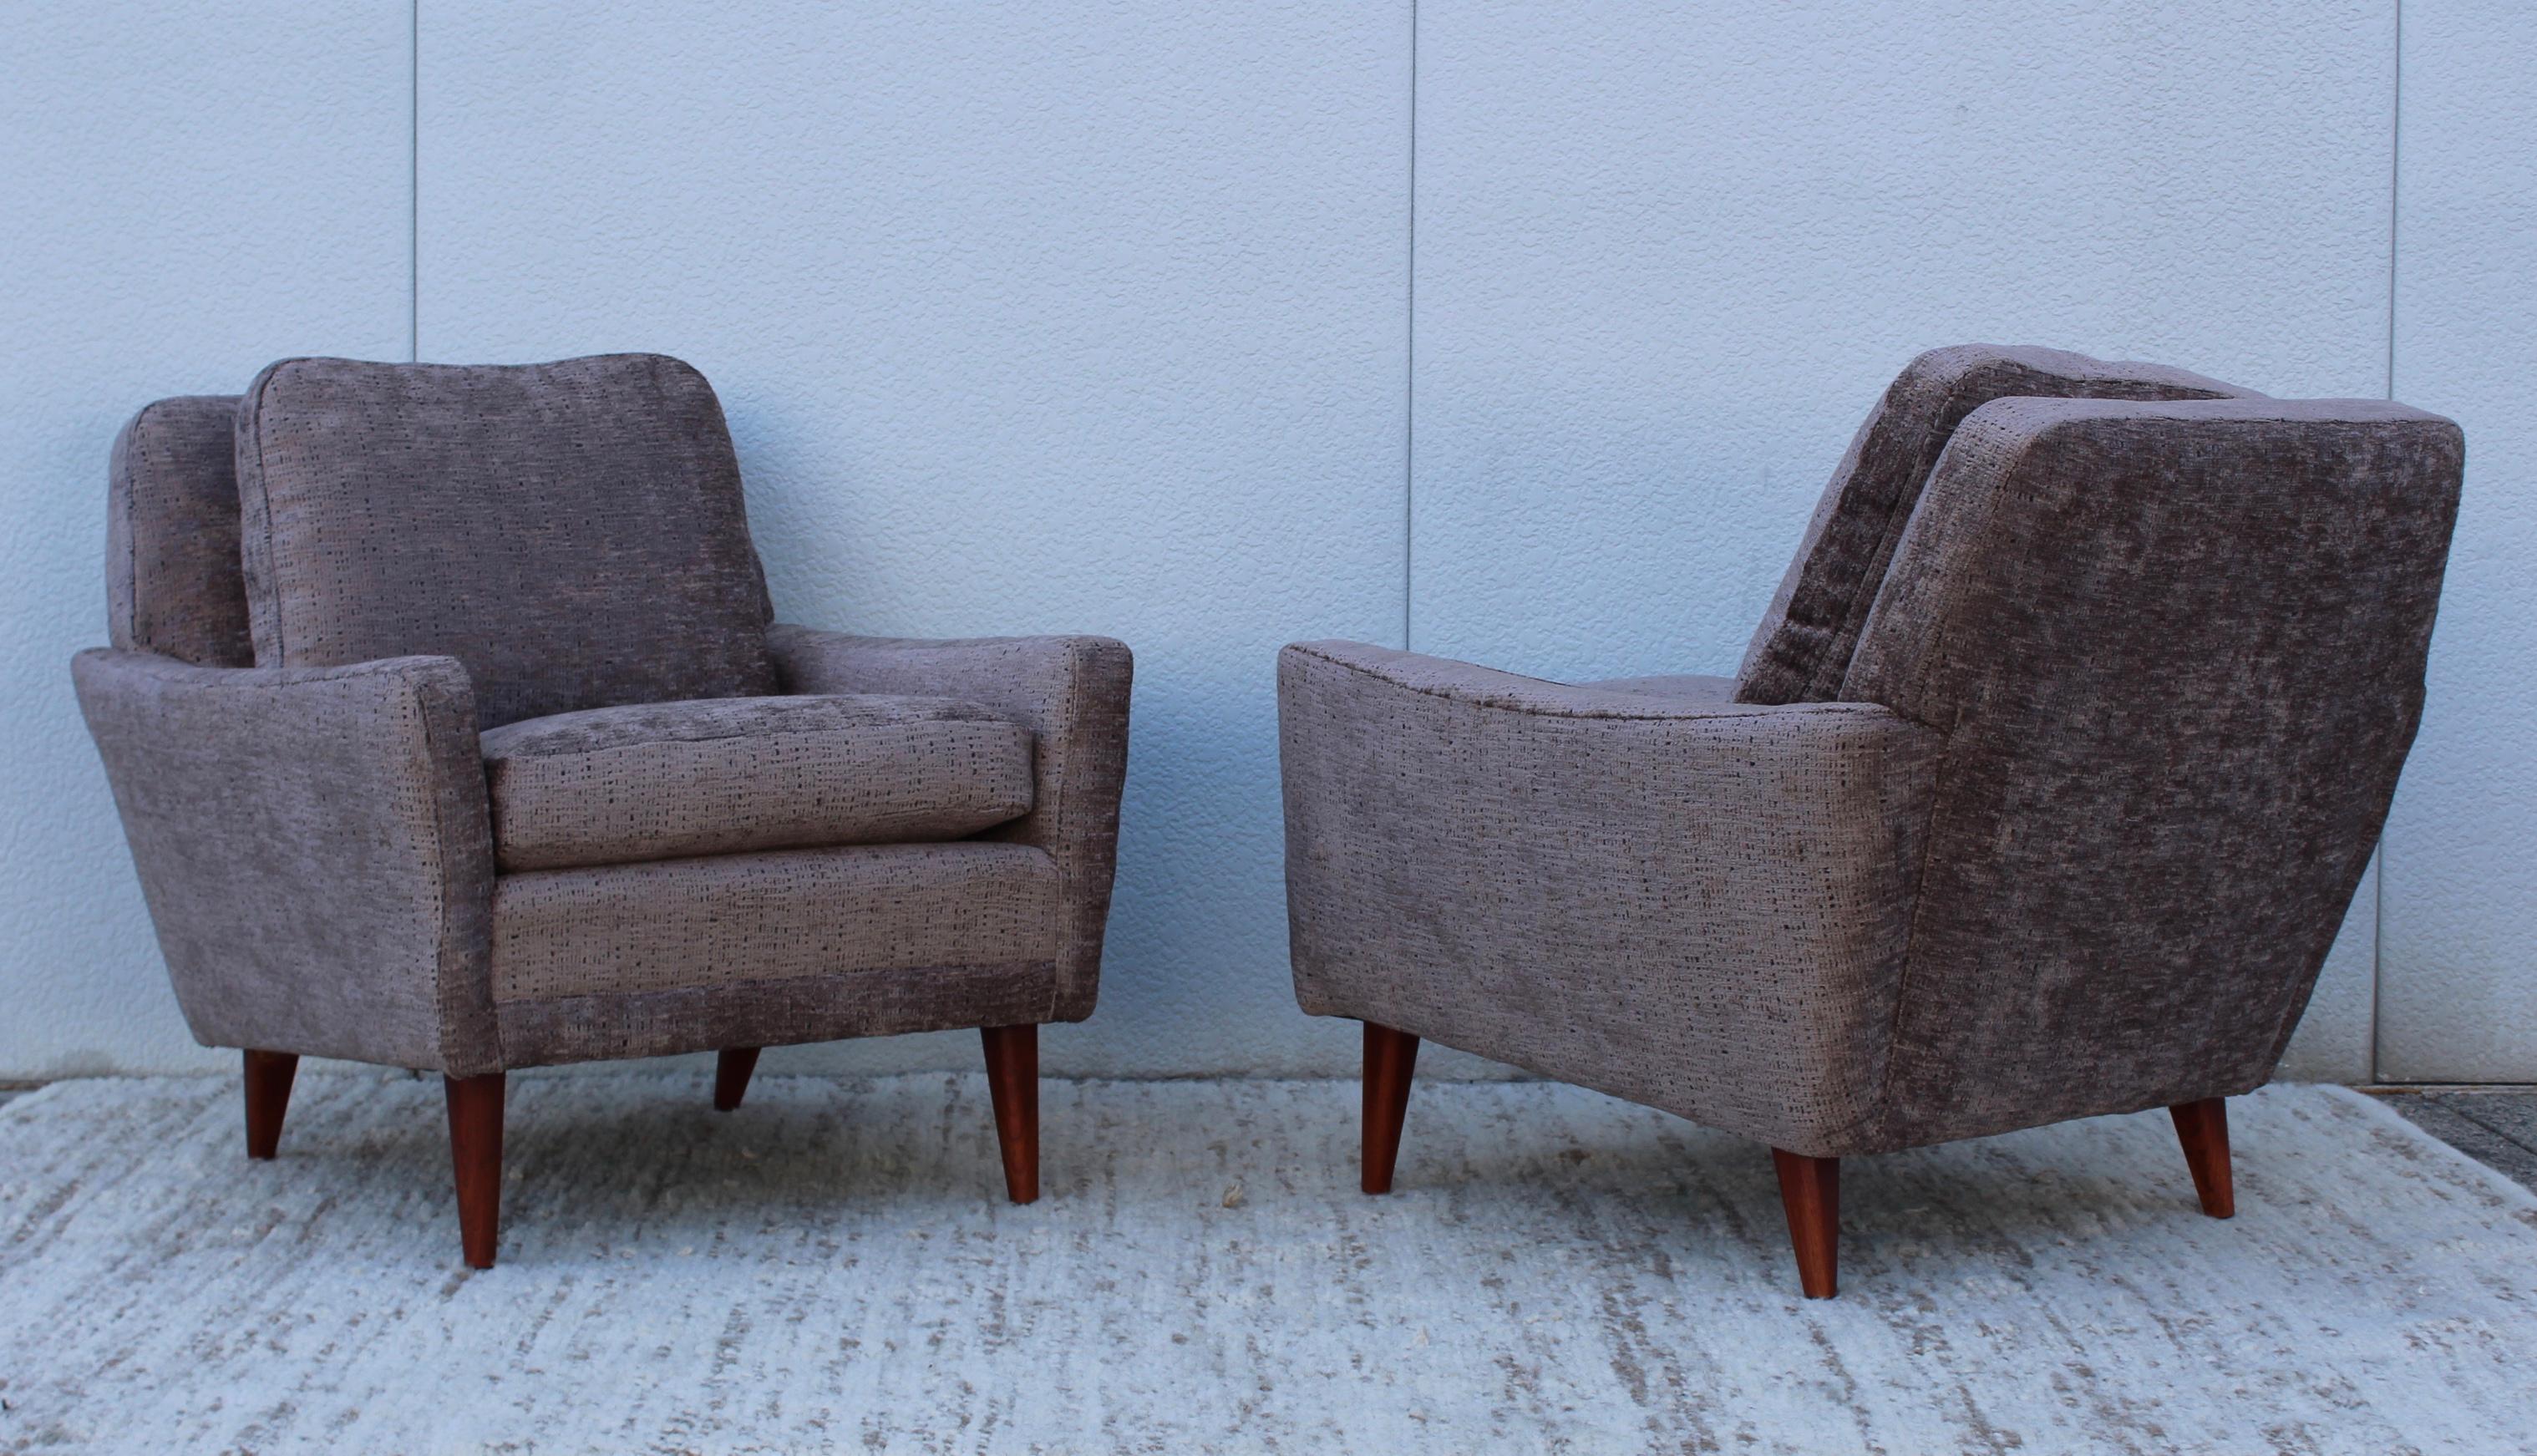 Stunning pair of 1960s large Swedish lounge chairs by DUX. Newly reupholstered in chenille.